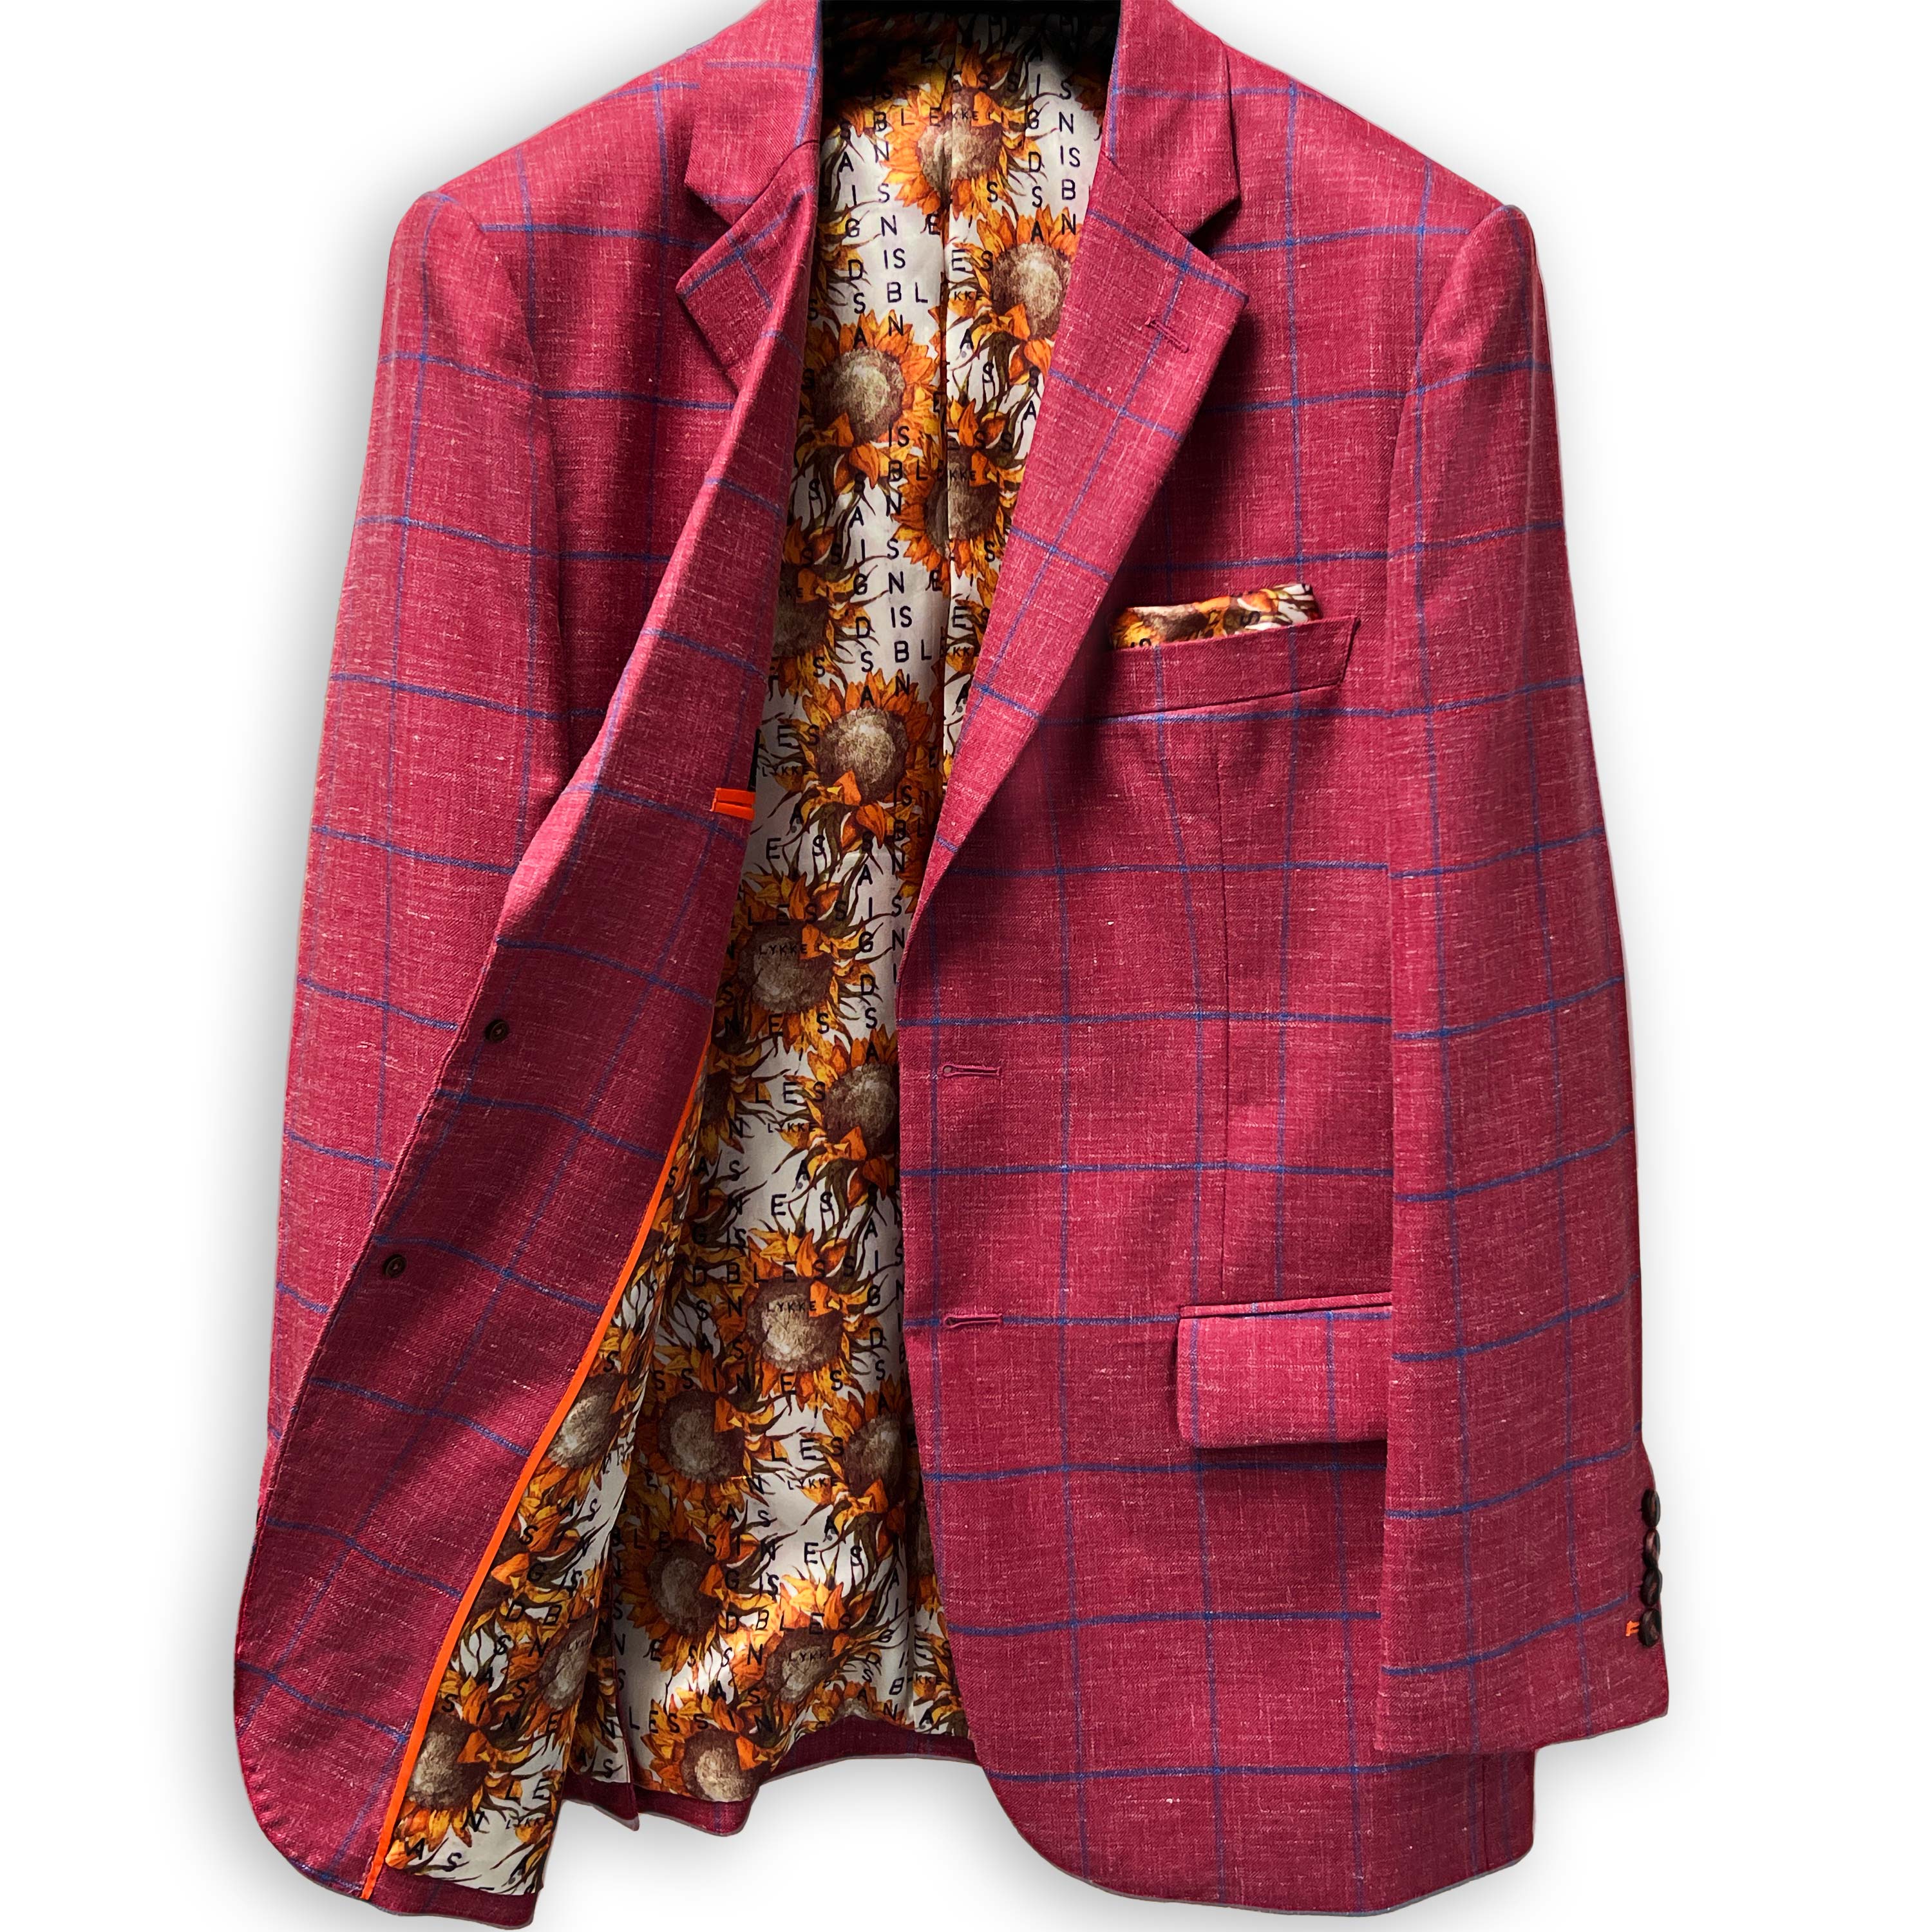 Exquisite hand-tailored rust maroon sportcoat, a symbol of fashionable suit trends for 2023.